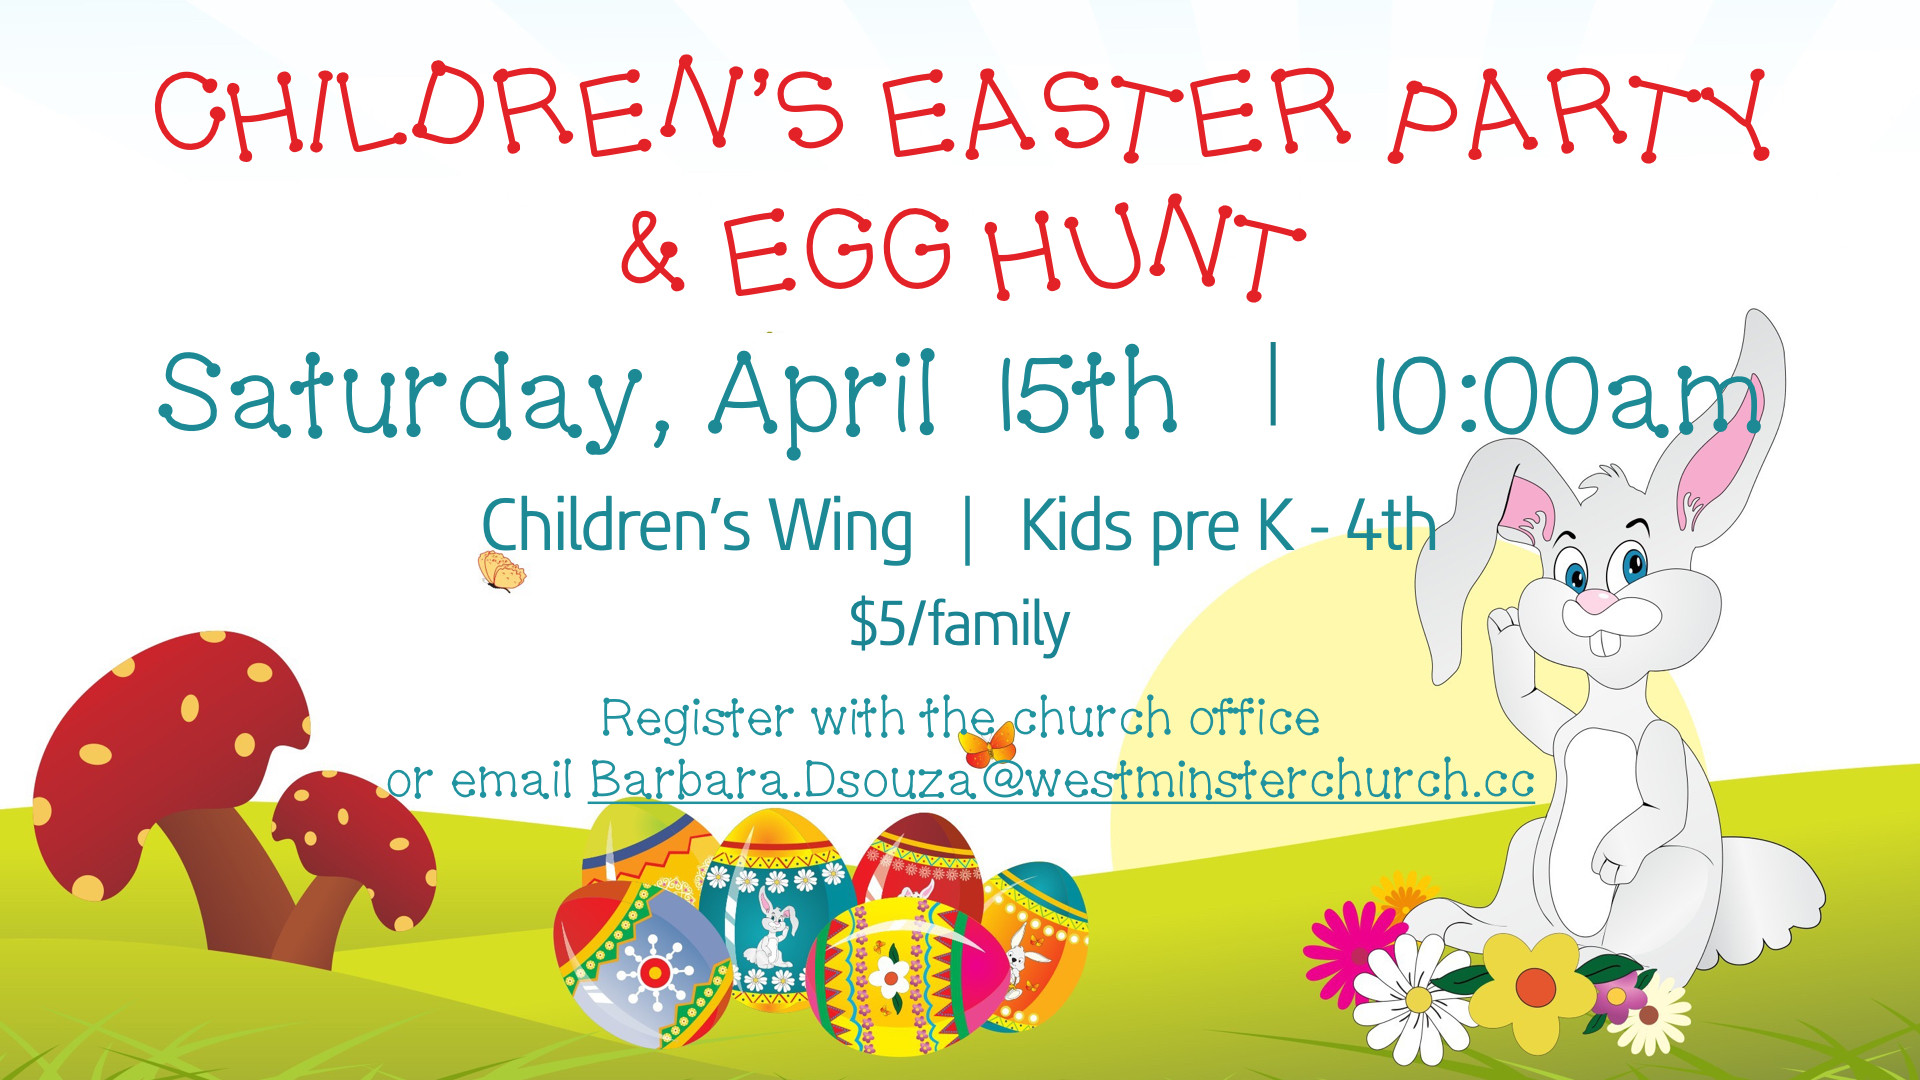 Easter Church Party Ideas
 Children s Easter Party Westminster Presbyterian Church